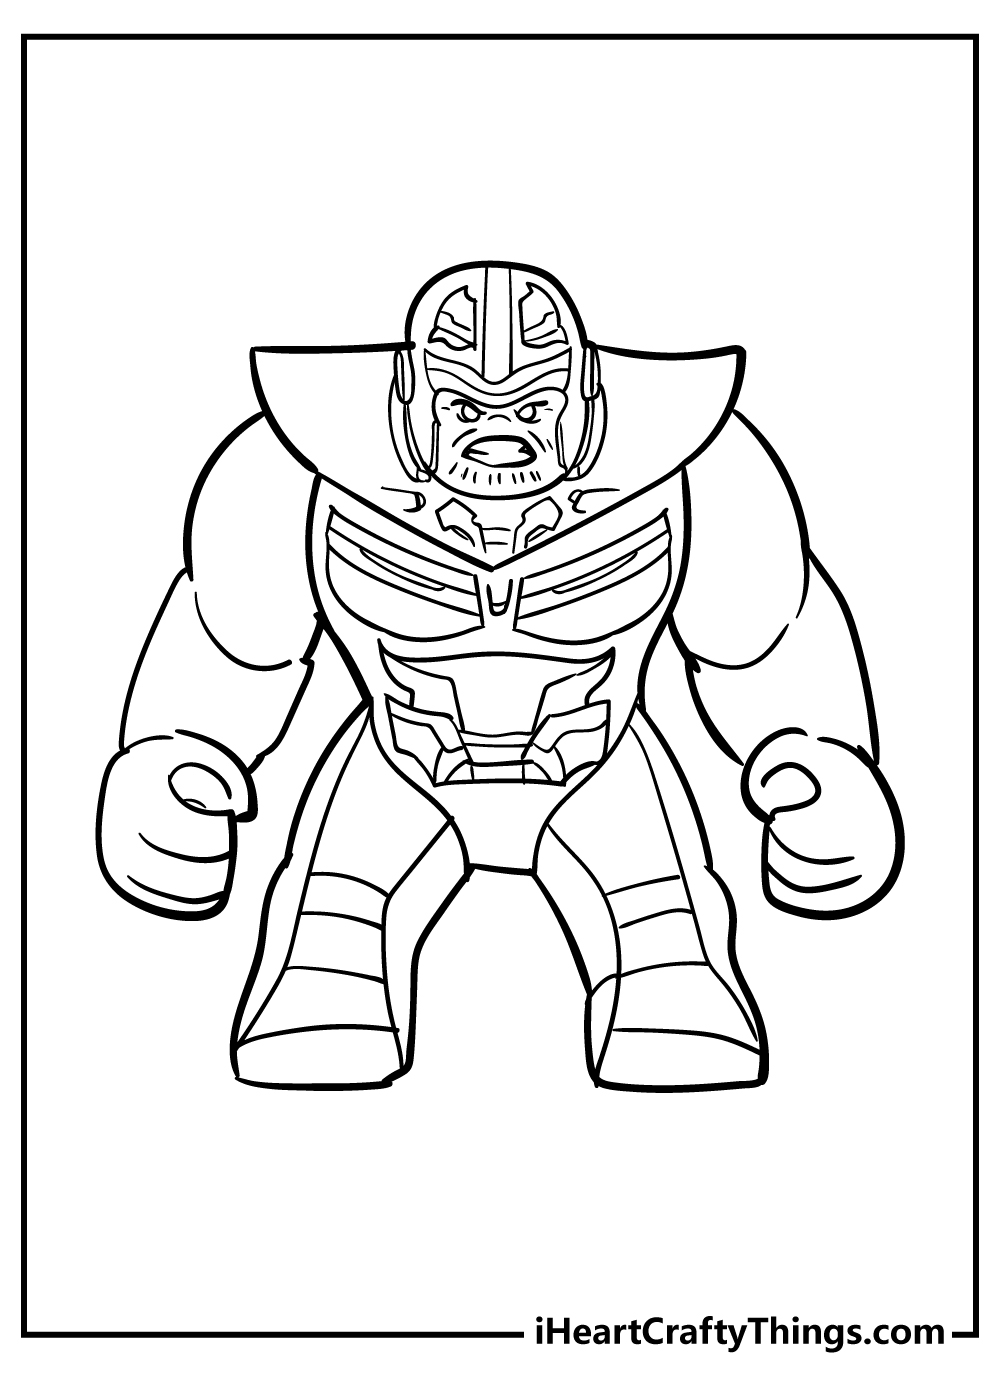 Lego Avengers Coloring Book for kids free printable